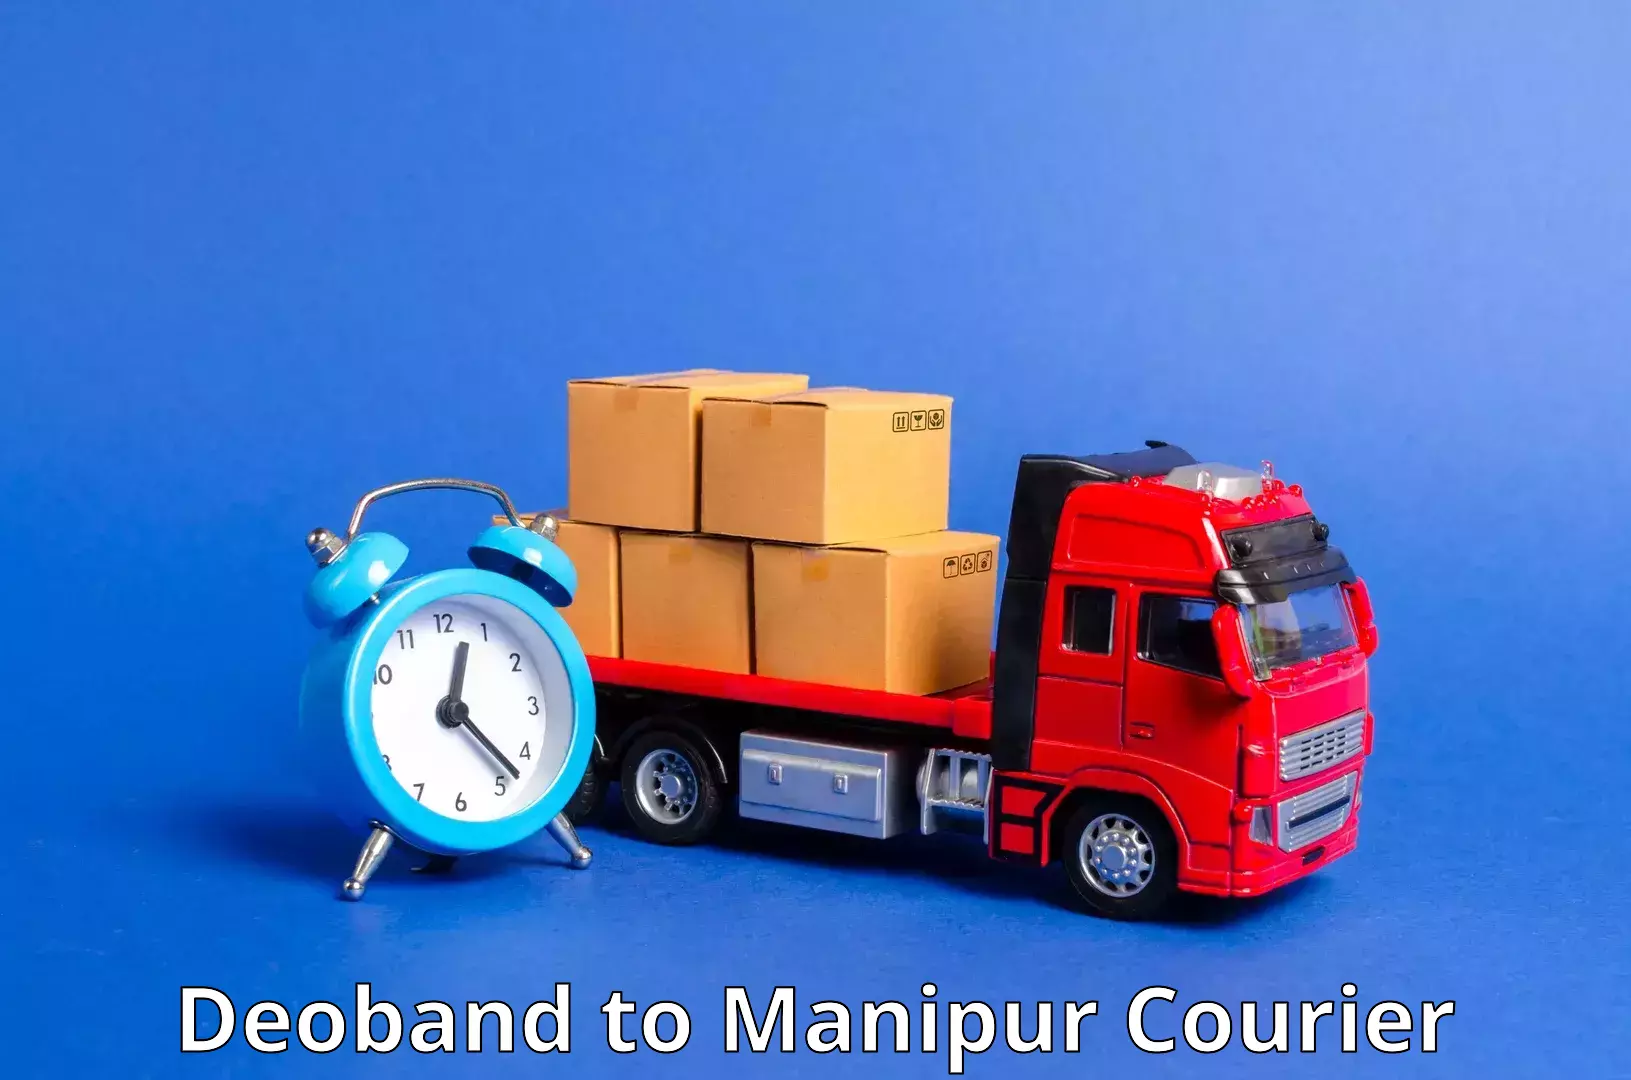 Global shipping networks Deoband to Manipur